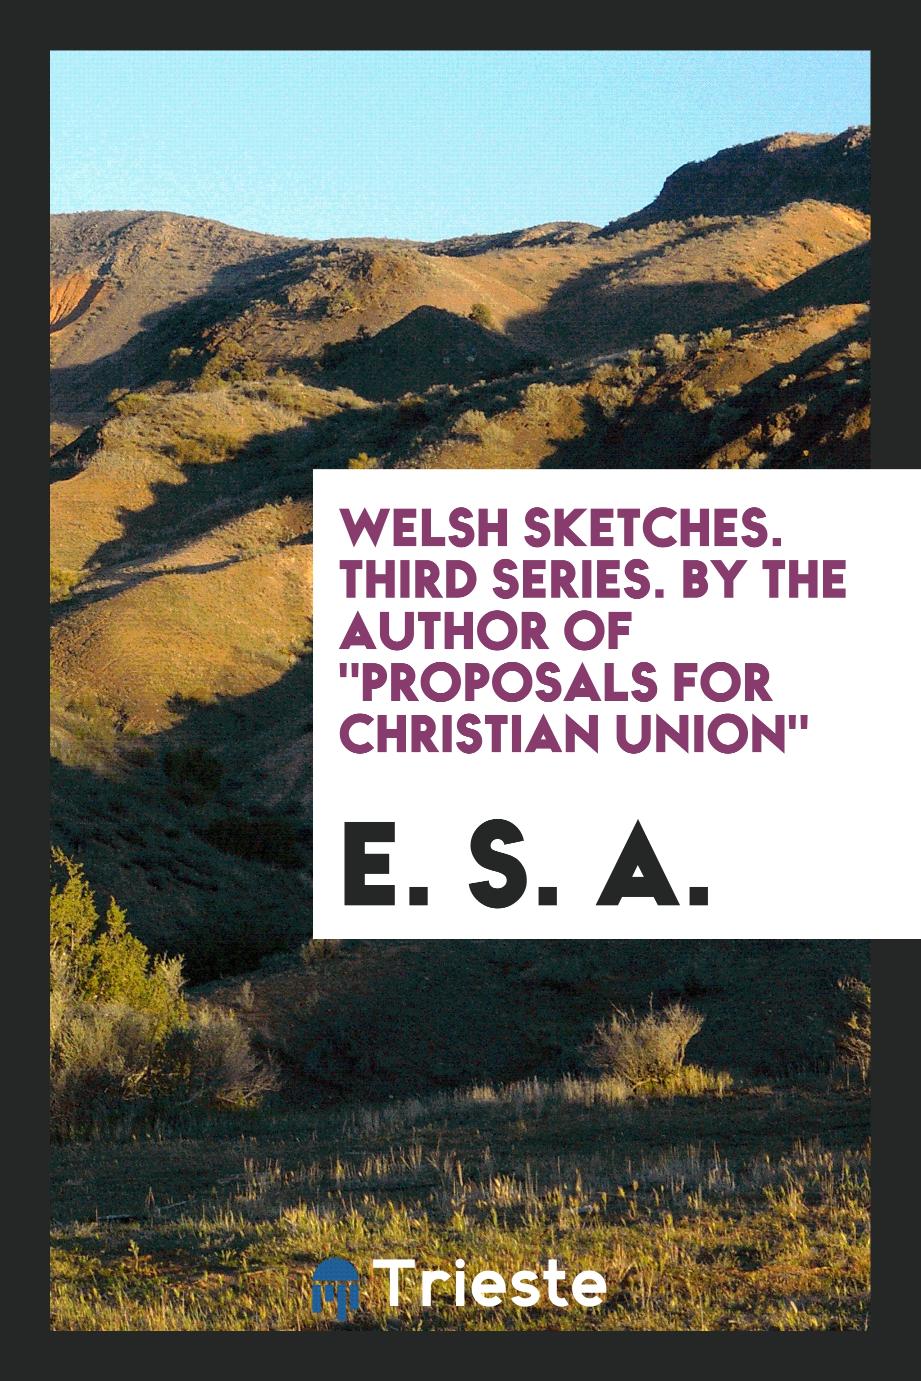 Welsh Sketches. Third Series. By the Author Of "Proposals for Christian Union"